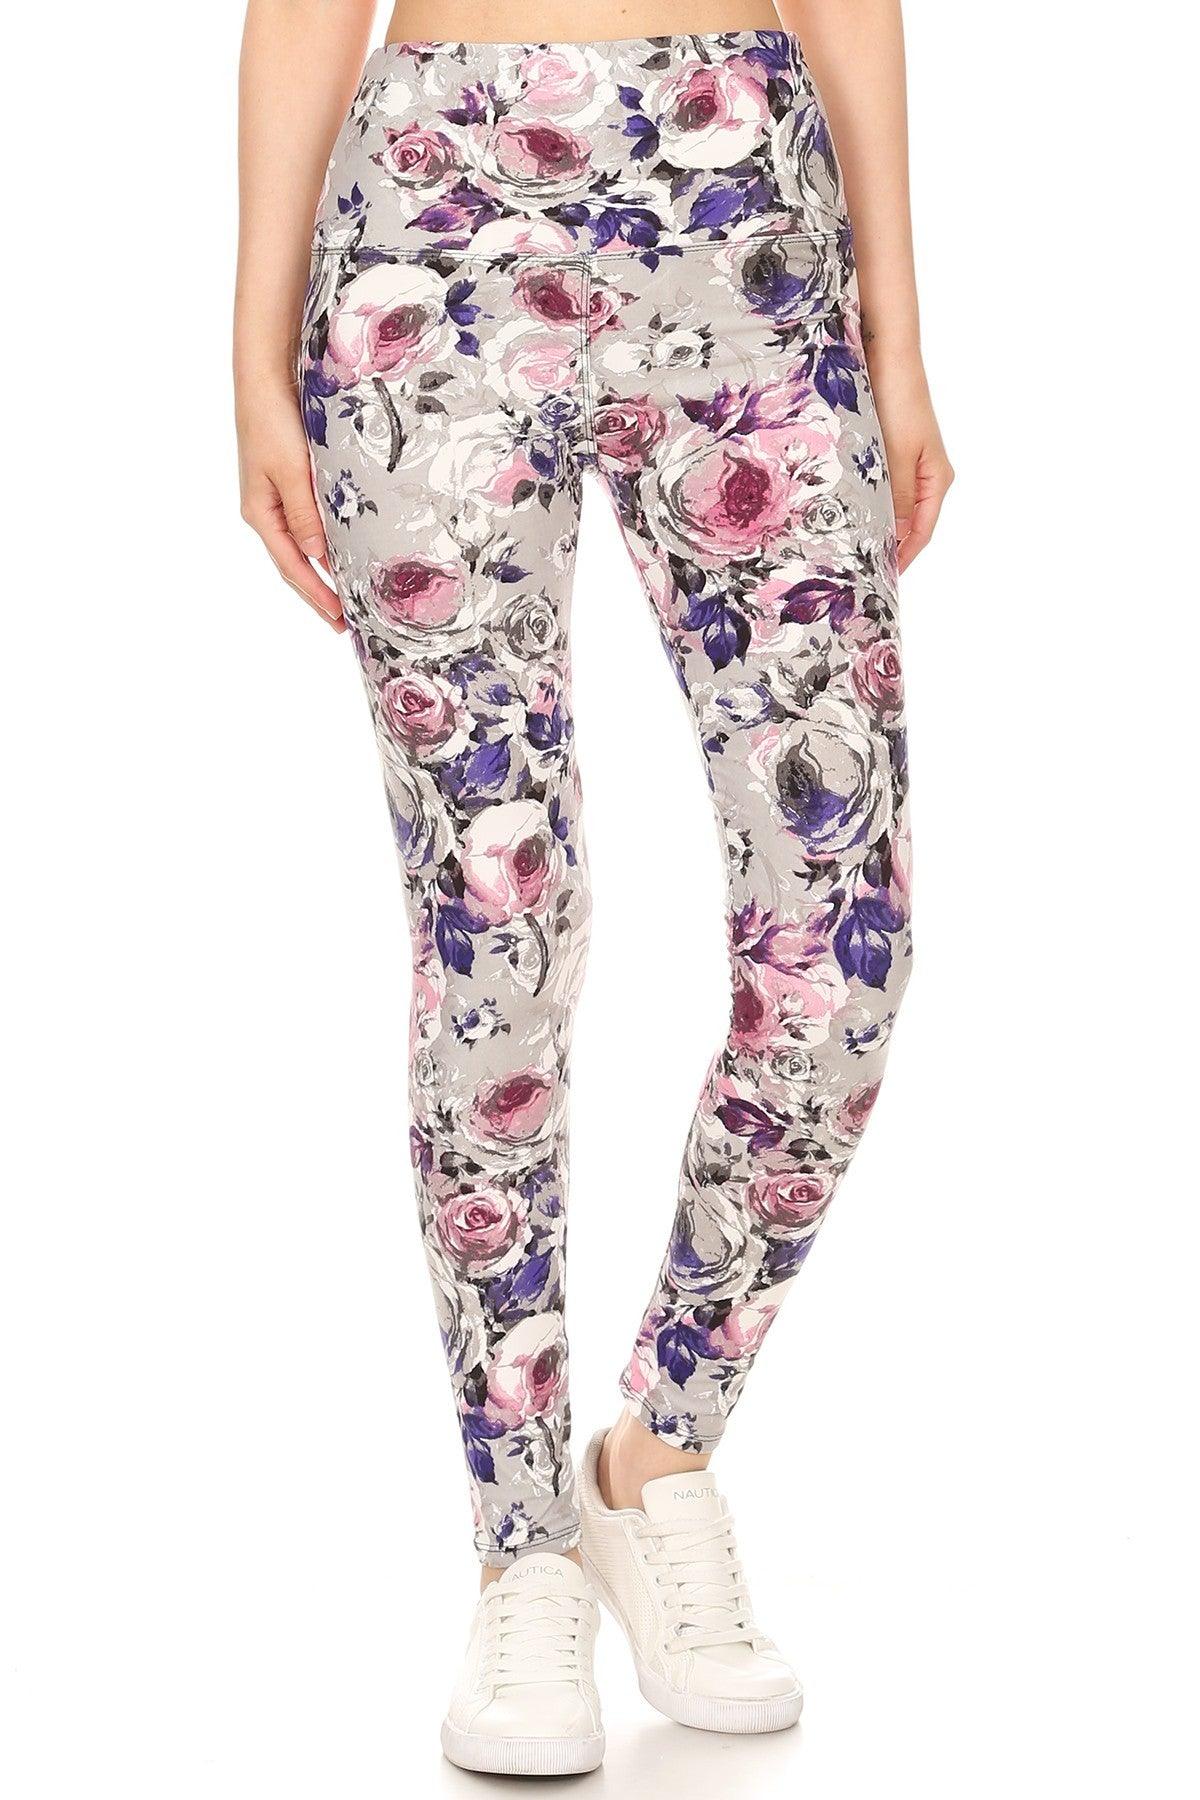 5-inch Long Yoga Style Banded Lined Floral Printed Knit Legging With High Waist - Boutique Fashionistah